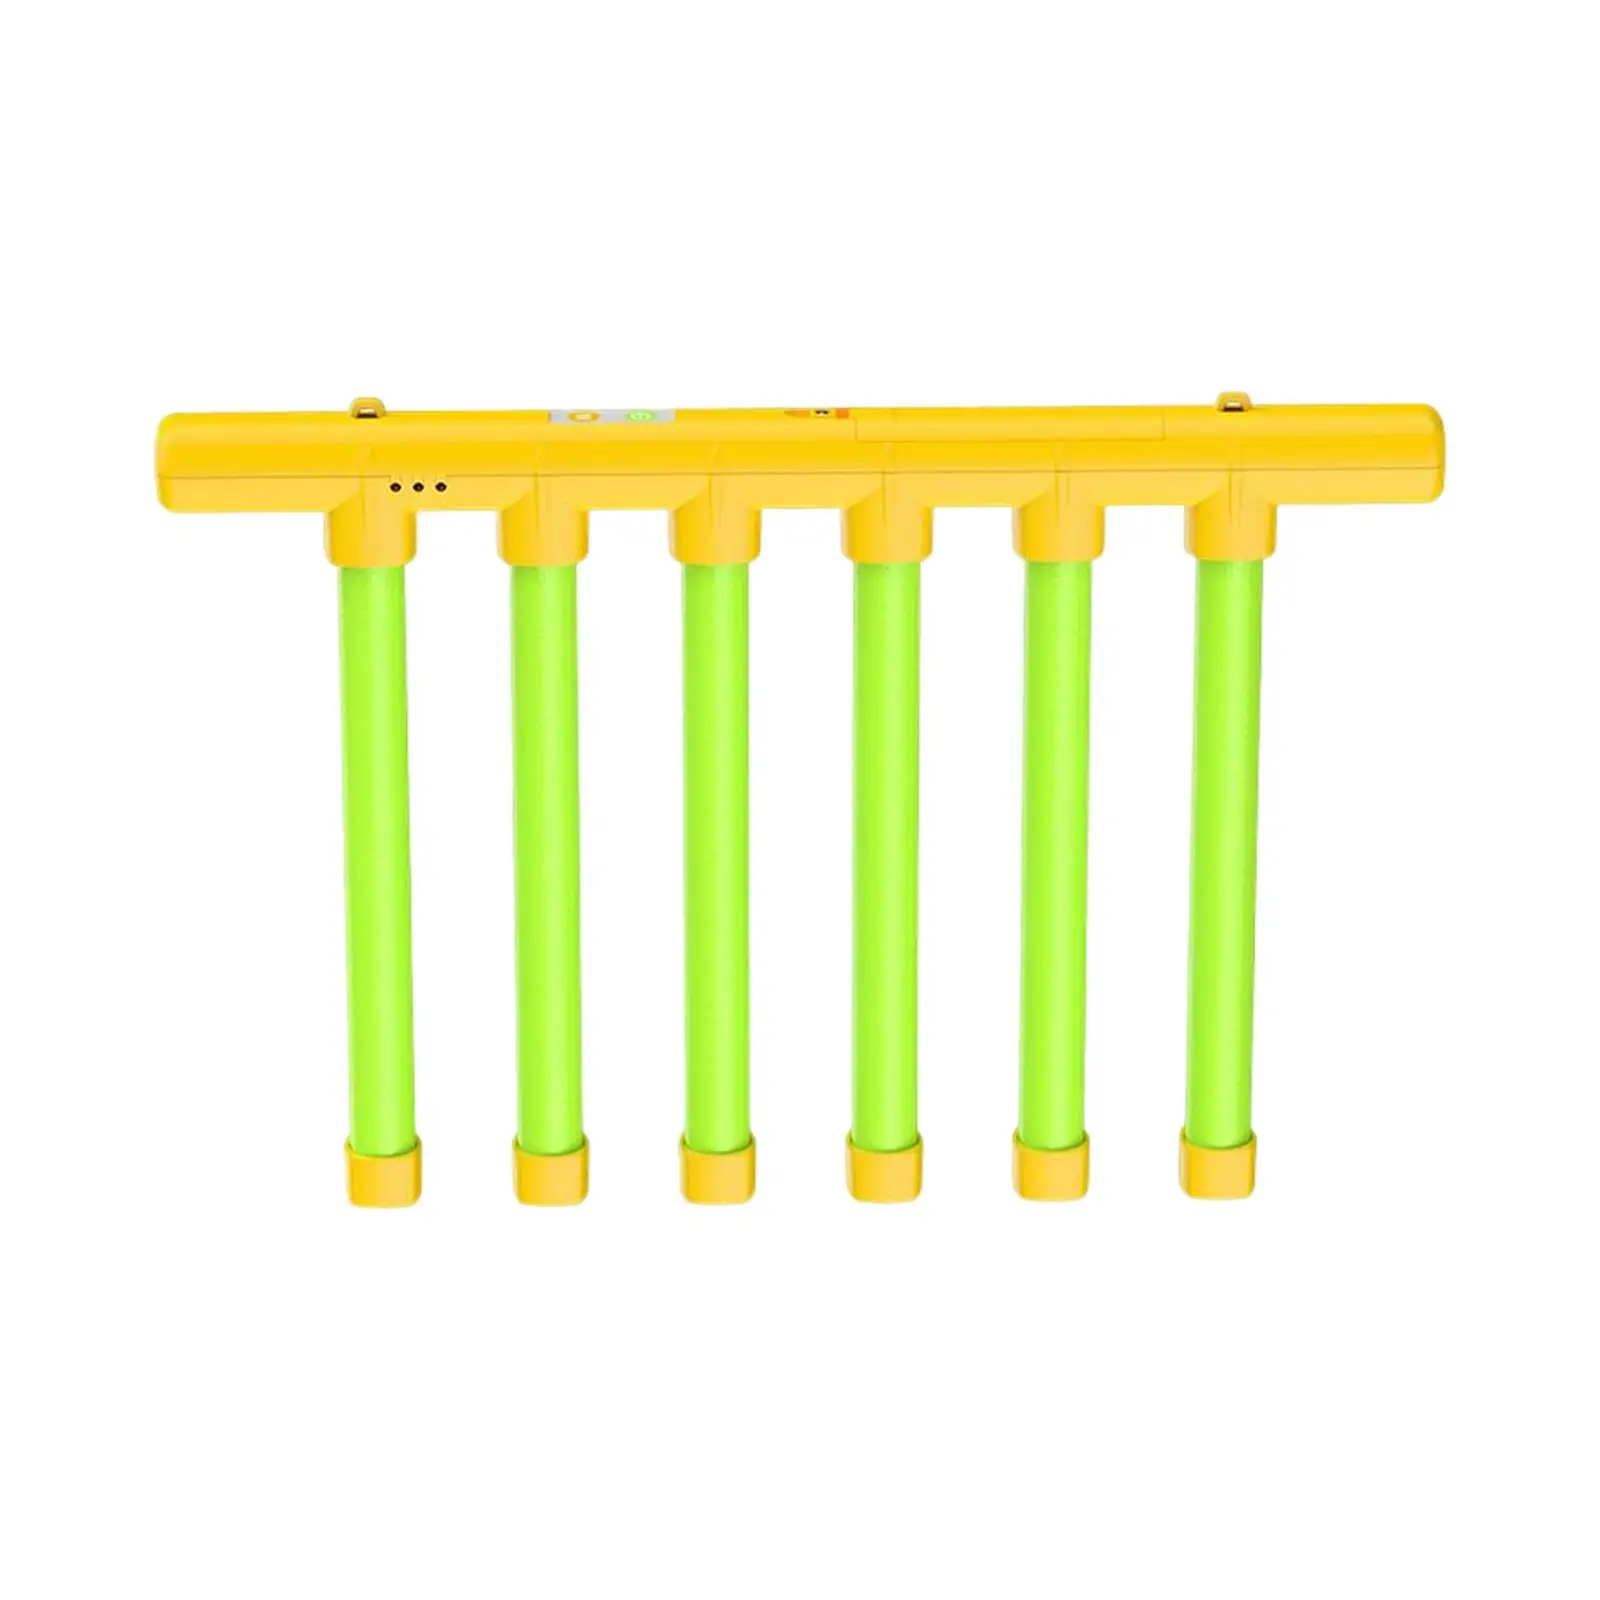 Stick catcher Early Education Puzzle Toy Accessories Partty Favor Competitive